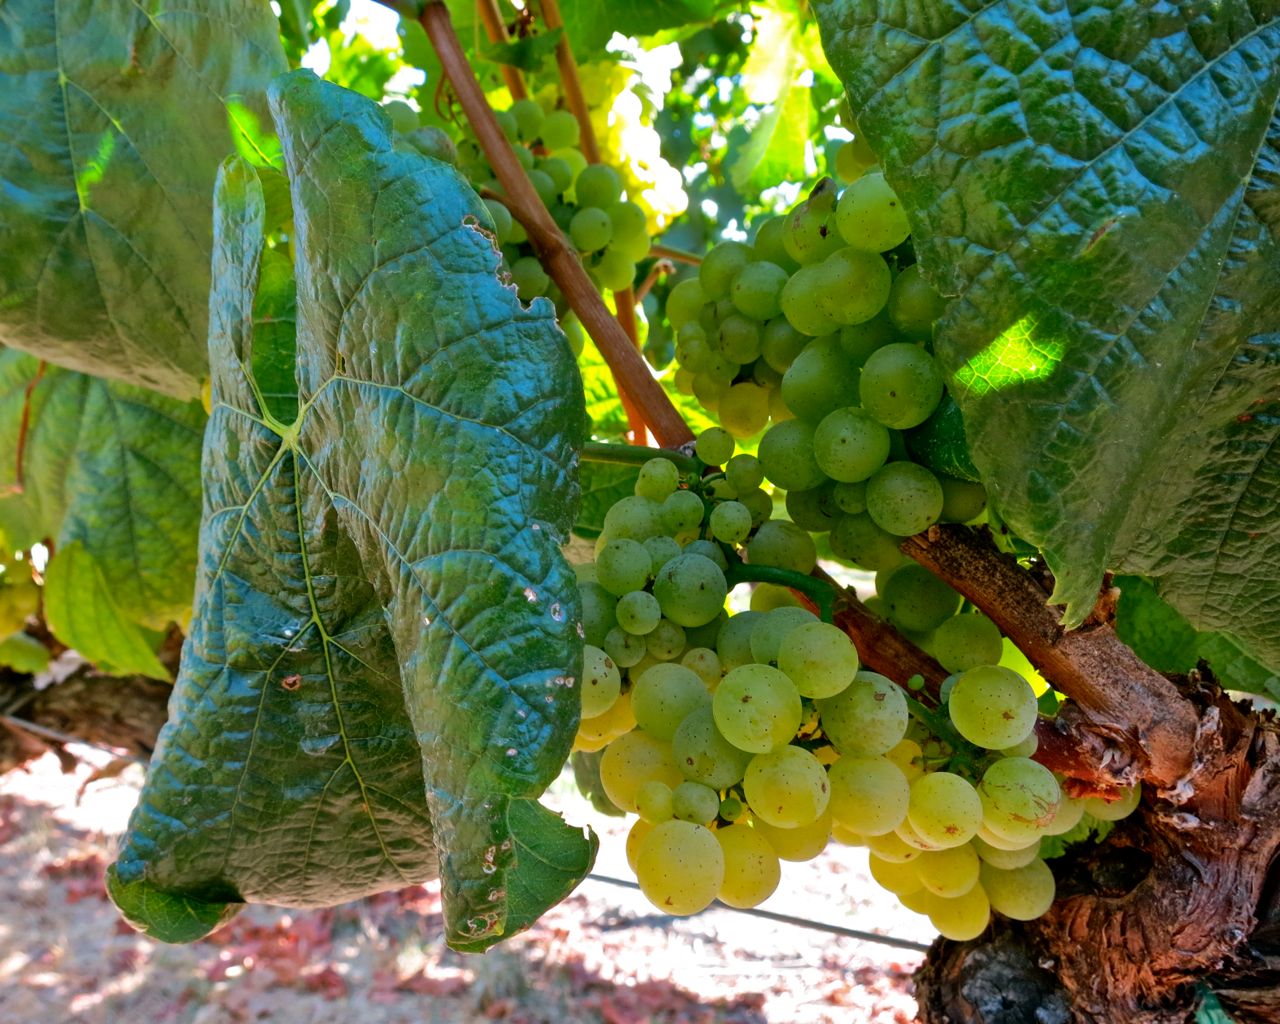 Old Wente Chardonnay showing visible signs of leafroll virus in leaves (typical of this non-clonal selection) in Wente Vineyards' Heritage Block, Livermore Valley.